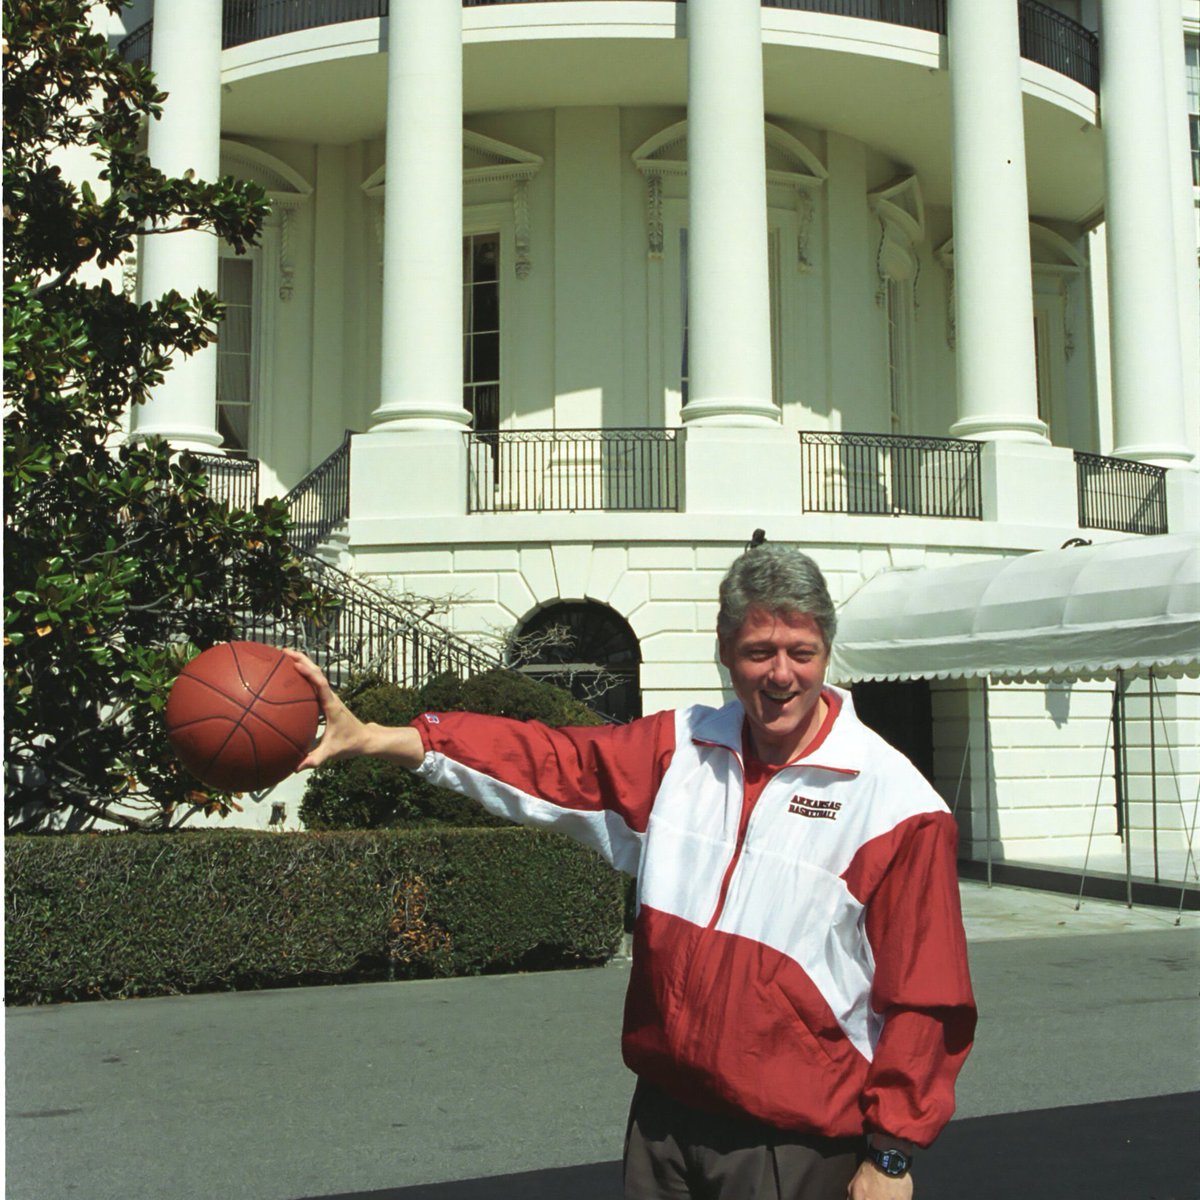 🏀 As #MarchMadness heats up, we're throwing it back 30 years to 1994 when President @BillClinton's favorite Arkansas @RazorbackMBB won their first national championship! #TBT